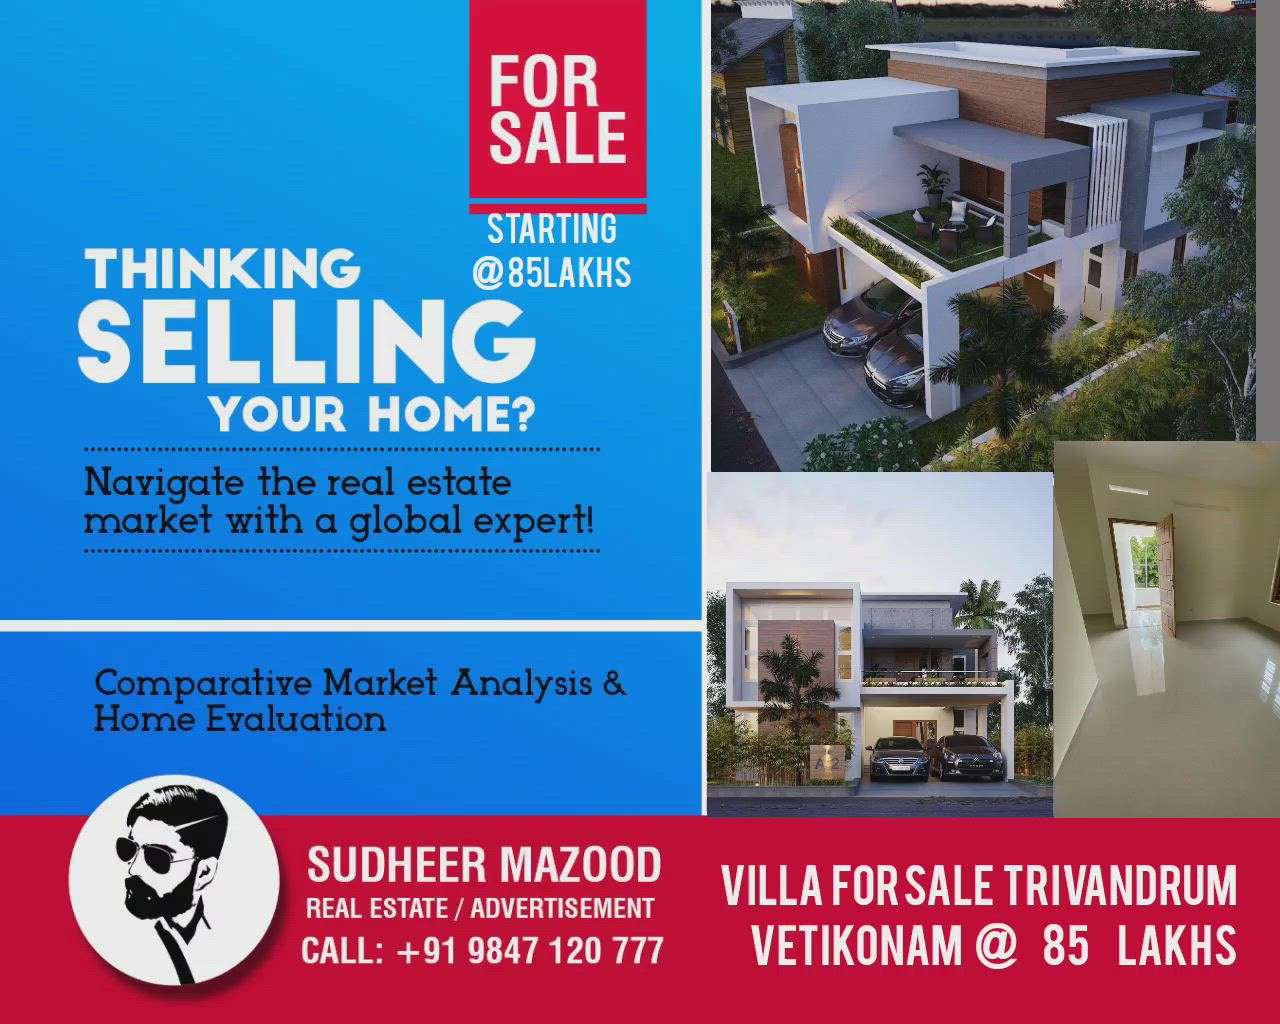 FOR SALE TRIVANDRUM 
Perookada Vazhayila
villas/ House Gated Community.Luxury Amenties.Red Brick construction.

200 Cent. 21 Unit . 
9 villas sold out in layout plan marked black spot that villa sold out . 

100 meter From Bus stop and junction. 
5km From kowdiar palace.City Limit Trivandrum Real estate.City limit.Corporation limit.

Price Starting at 82 lakhs
   
4.75 Cents and 1600 Sqft 3 Bed Attached 

5.5 Cents 2300 Sqft 4Bed Attached 

7cents 2500 Sqft 4 Bed Attached 

10 Cents 2800 to 3000 Sqft 4 Bed Attached .

LOCATION
Vazhayila Vattiyoorkave Road 100 meter From Bus stop junction 5km From kowdiar palace  meter  From junction Walking Distance From Bus stop .

200 Cents 21 Villas Gated Community 

Villa / House project at Vazhayila in peroorkada Trivandrum .

Construction Status - on Going 60% Sold 
out Red Brick construction with international Standards Fully using Branded Materials * 

Land area - 4.75  to 15 Cent 

Sqft  - 1600 , 2800 , 3000 Sqft 

Bed and Bath - 3,4, 5